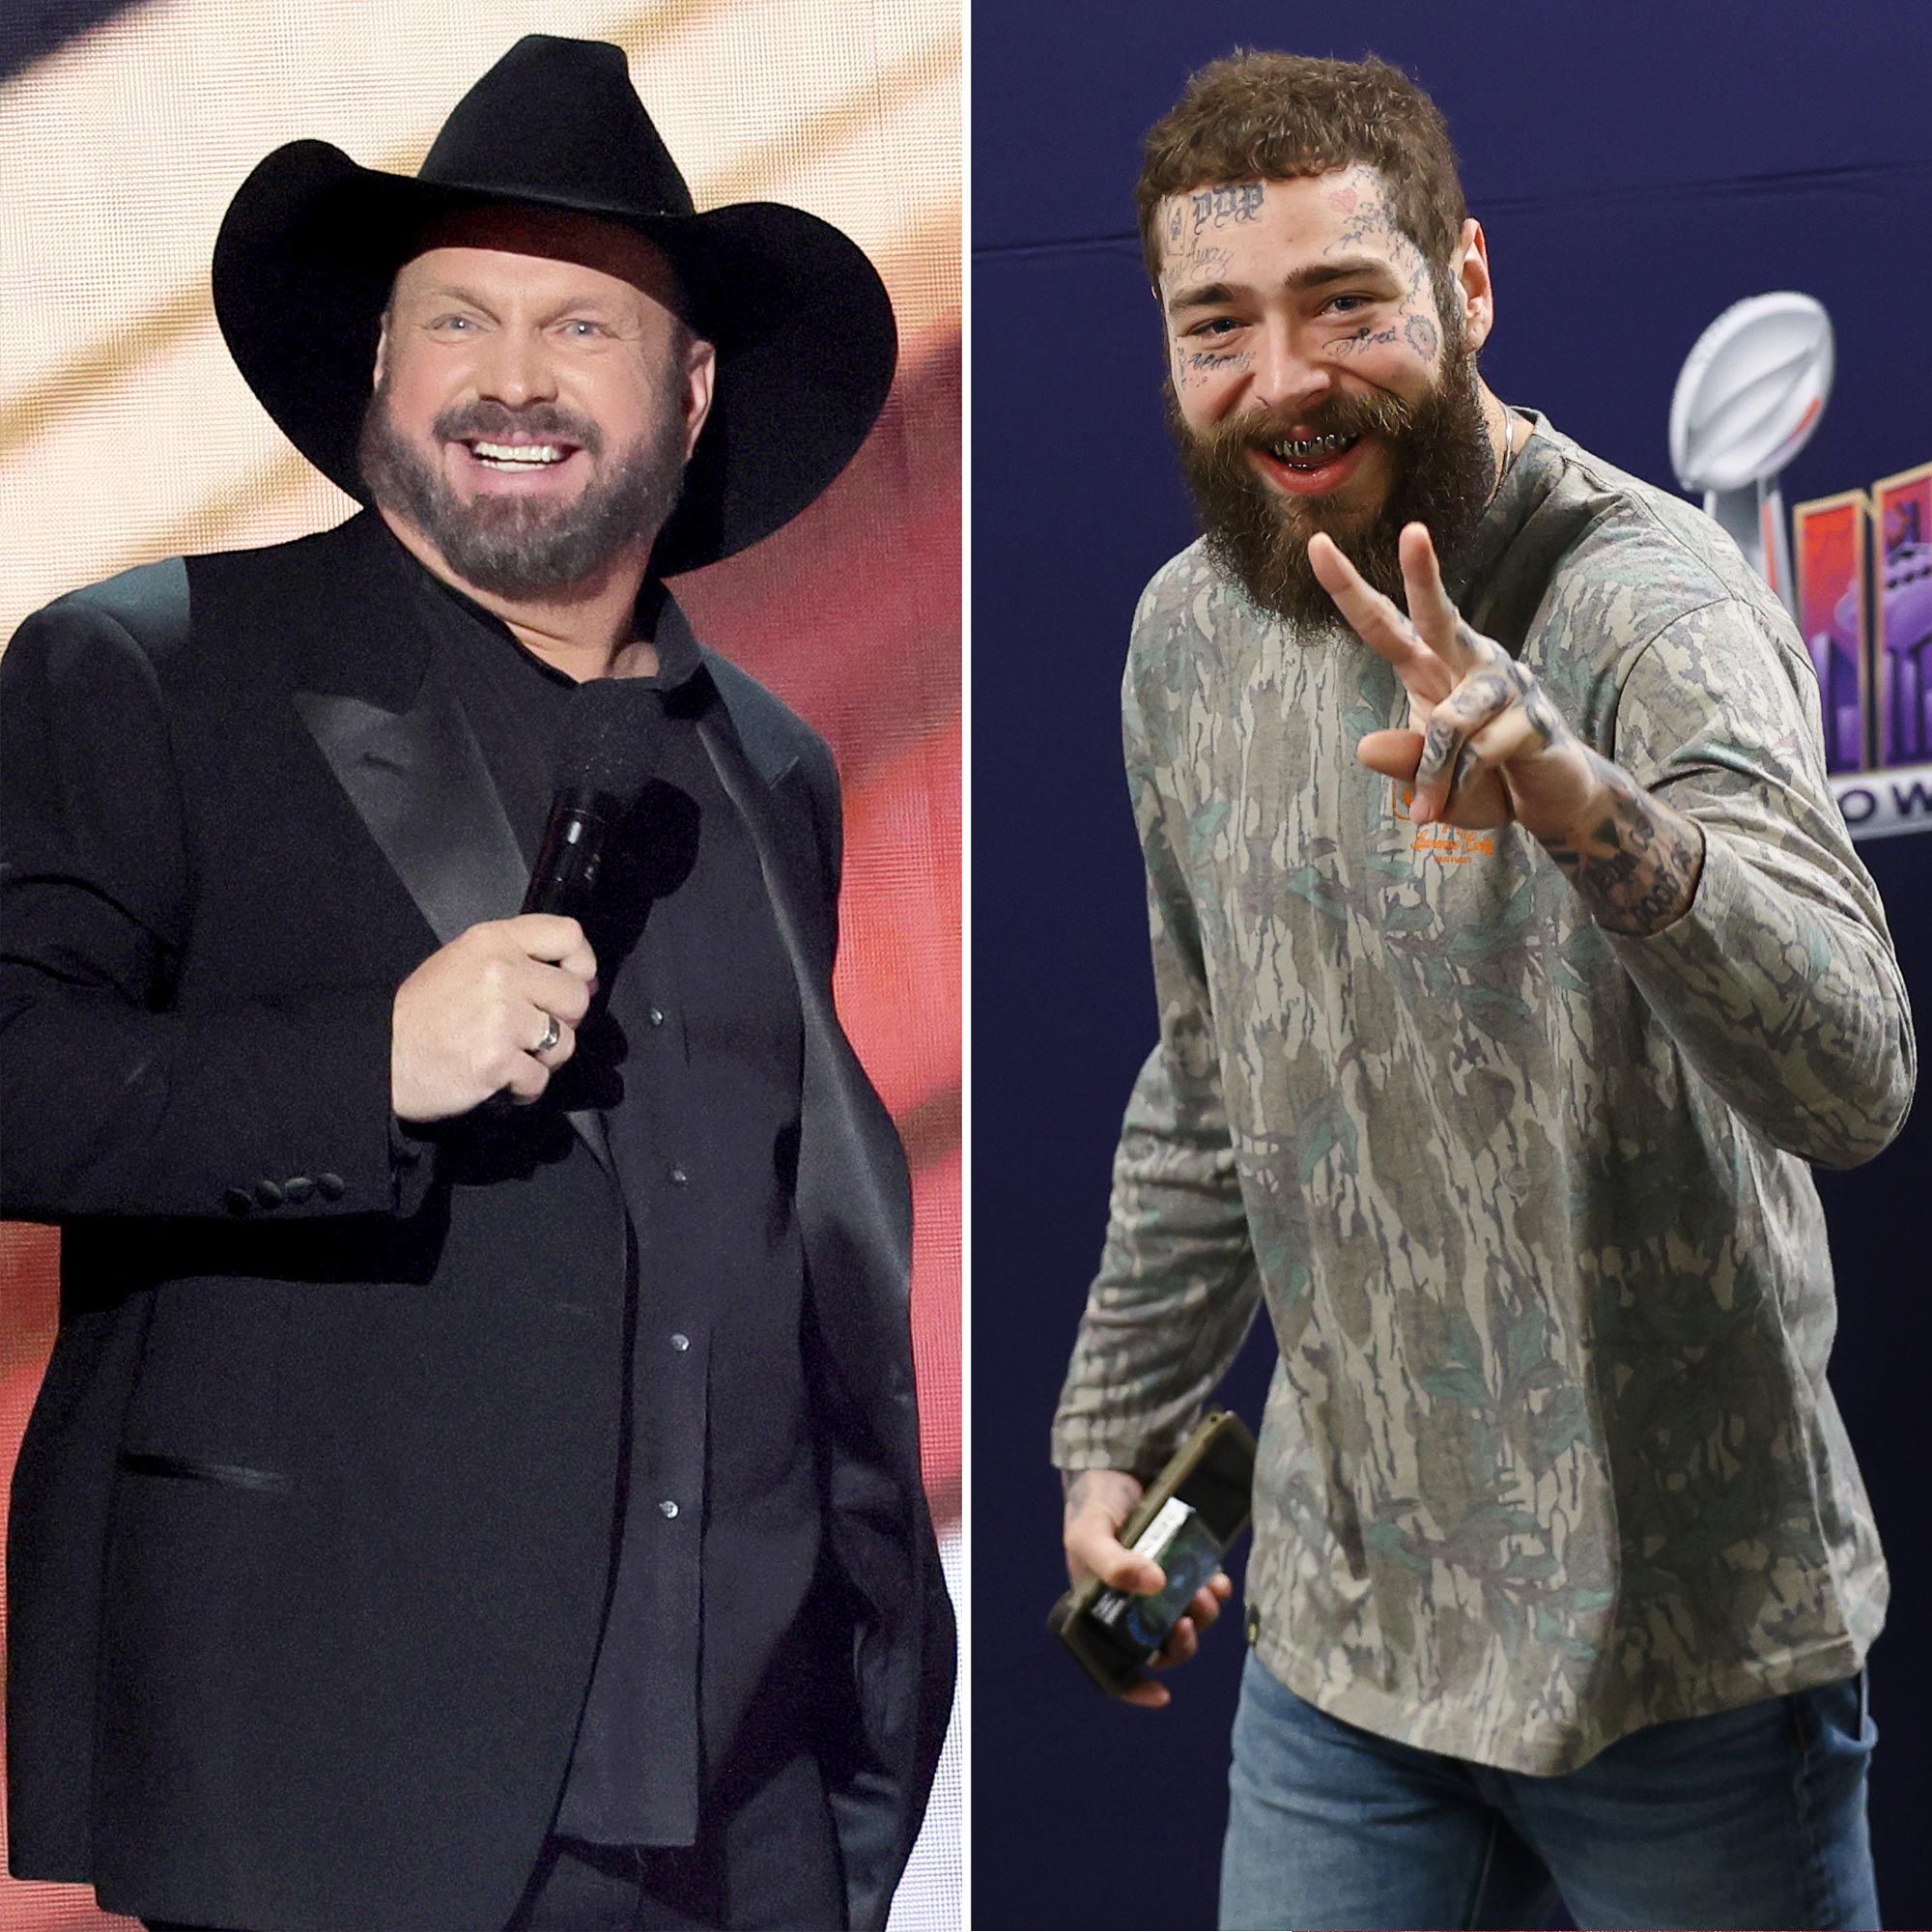 Garth Brooks Reacts to Post Malone's Cover of His 'Friends in Low Places'